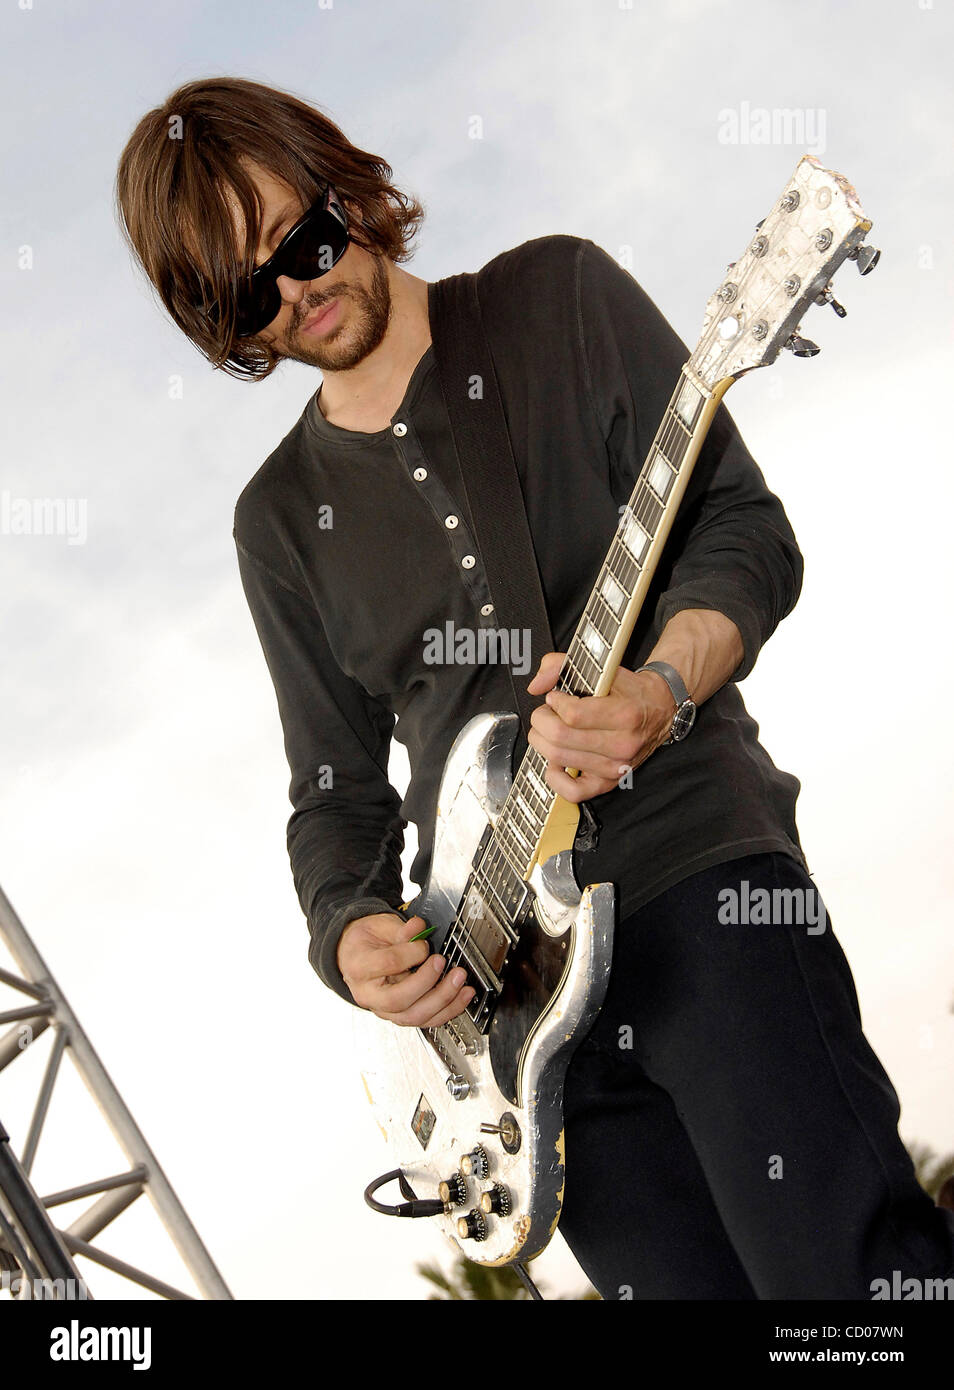 April 27, 2008; Indio, CA, USA; Musician GREG EDWARDS, of 'Autolux,' performing during the 2008 Coachella Valley Music & Arts Festival at the Empire Polo Club. Mandatory Credit: Photo by Vaughn Youtz/ZUMA Press. (©) Copyright 2007 by Vaughn Youtz. Stock Photo